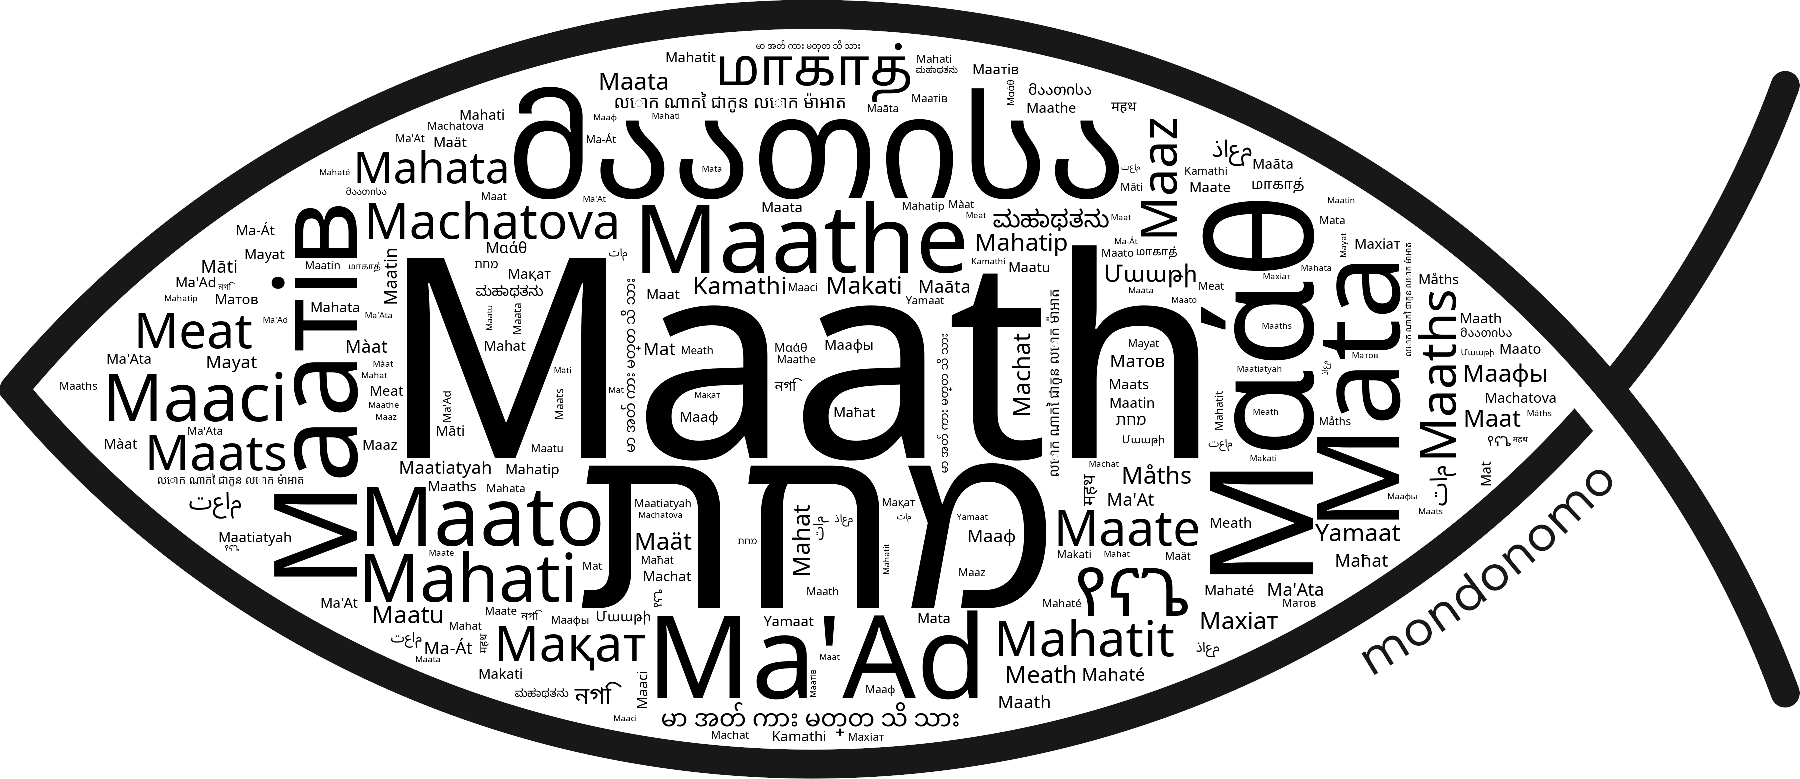 Name Maath in the world's Bibles